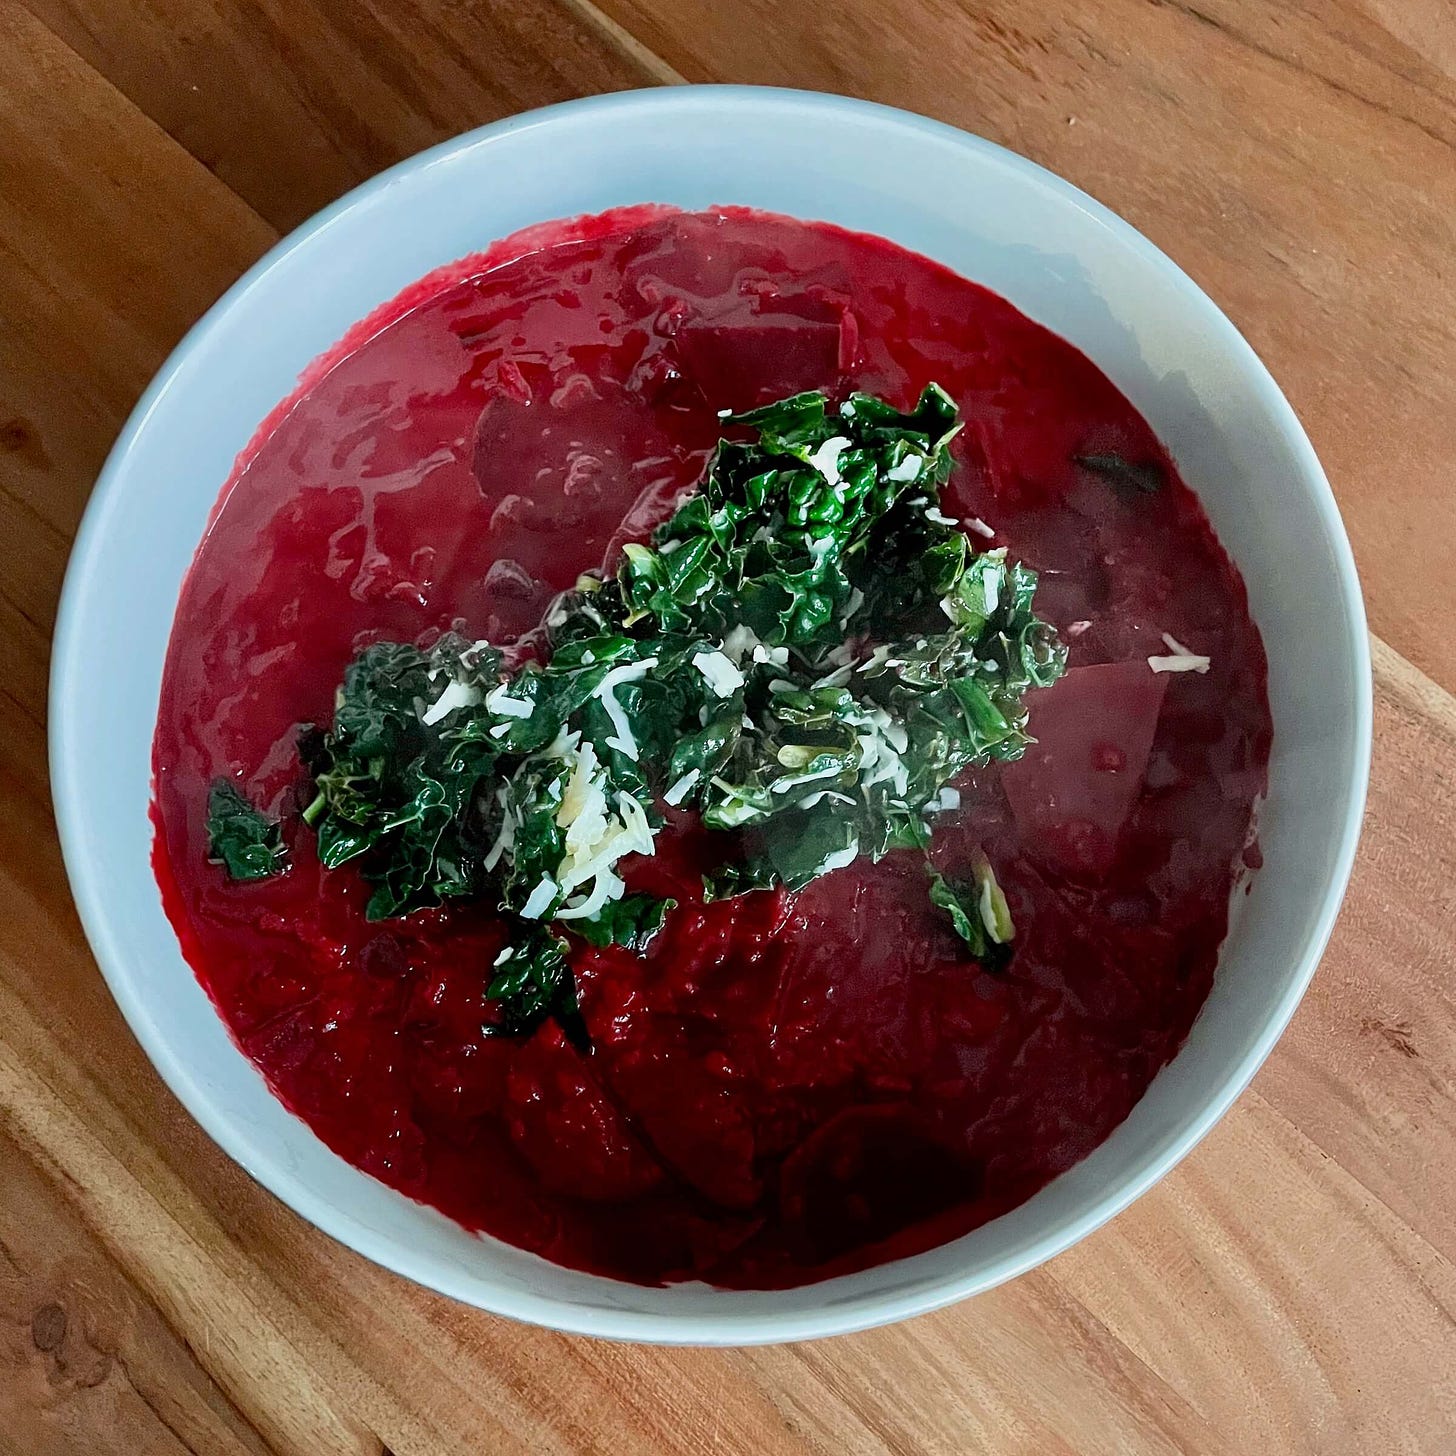 A bowl of bright red beetroot risotto with a deep green lacinato kale on top.